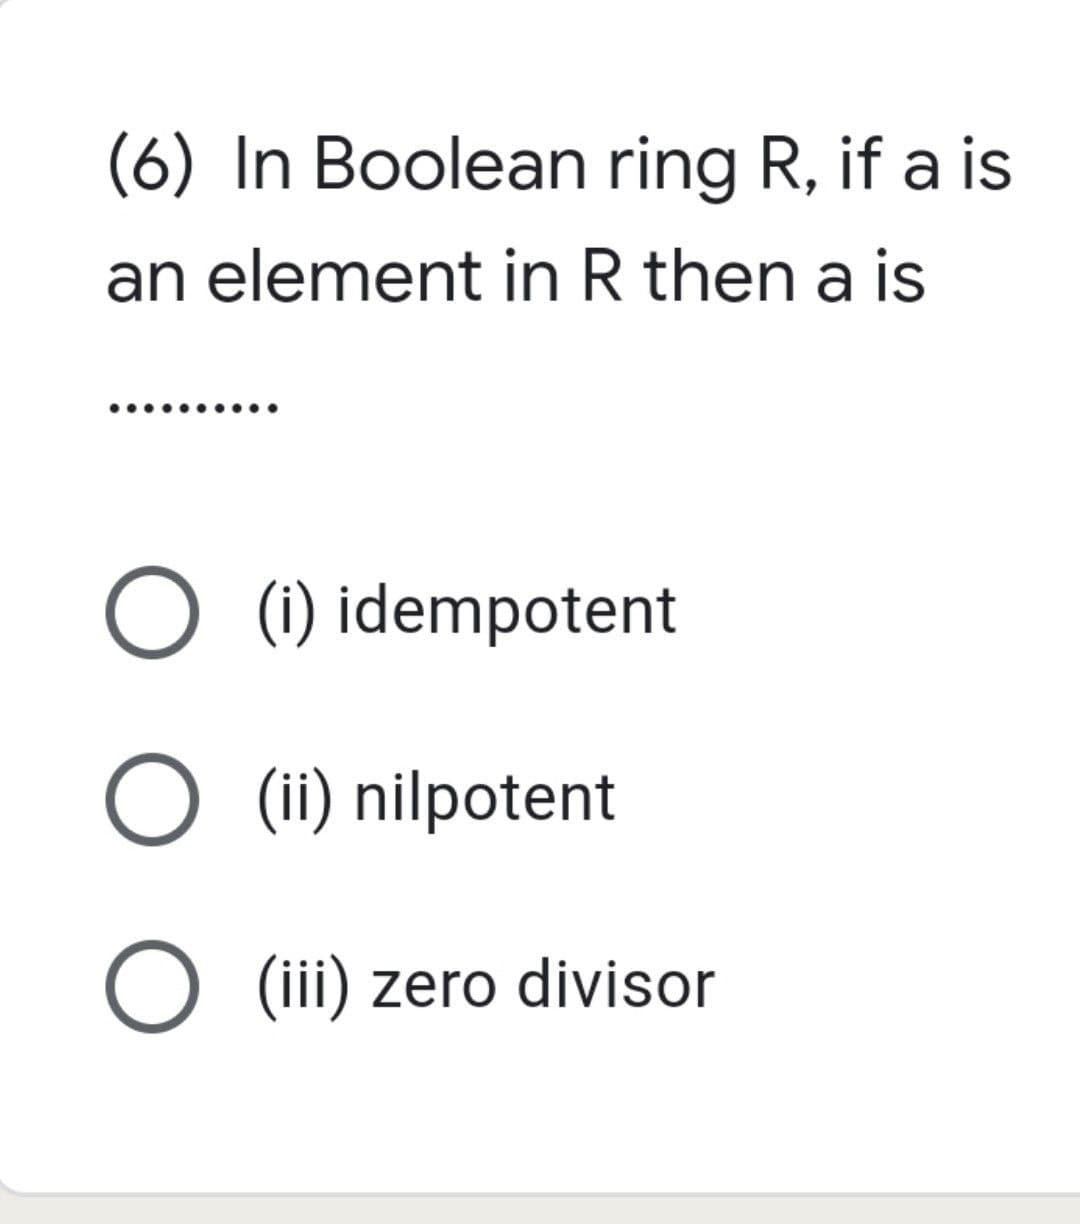 (6) In Boolean ring R, if a is
an element in R then a is
O (i) idempotent
O (ii) nilpotent
O (iii) zero divisor